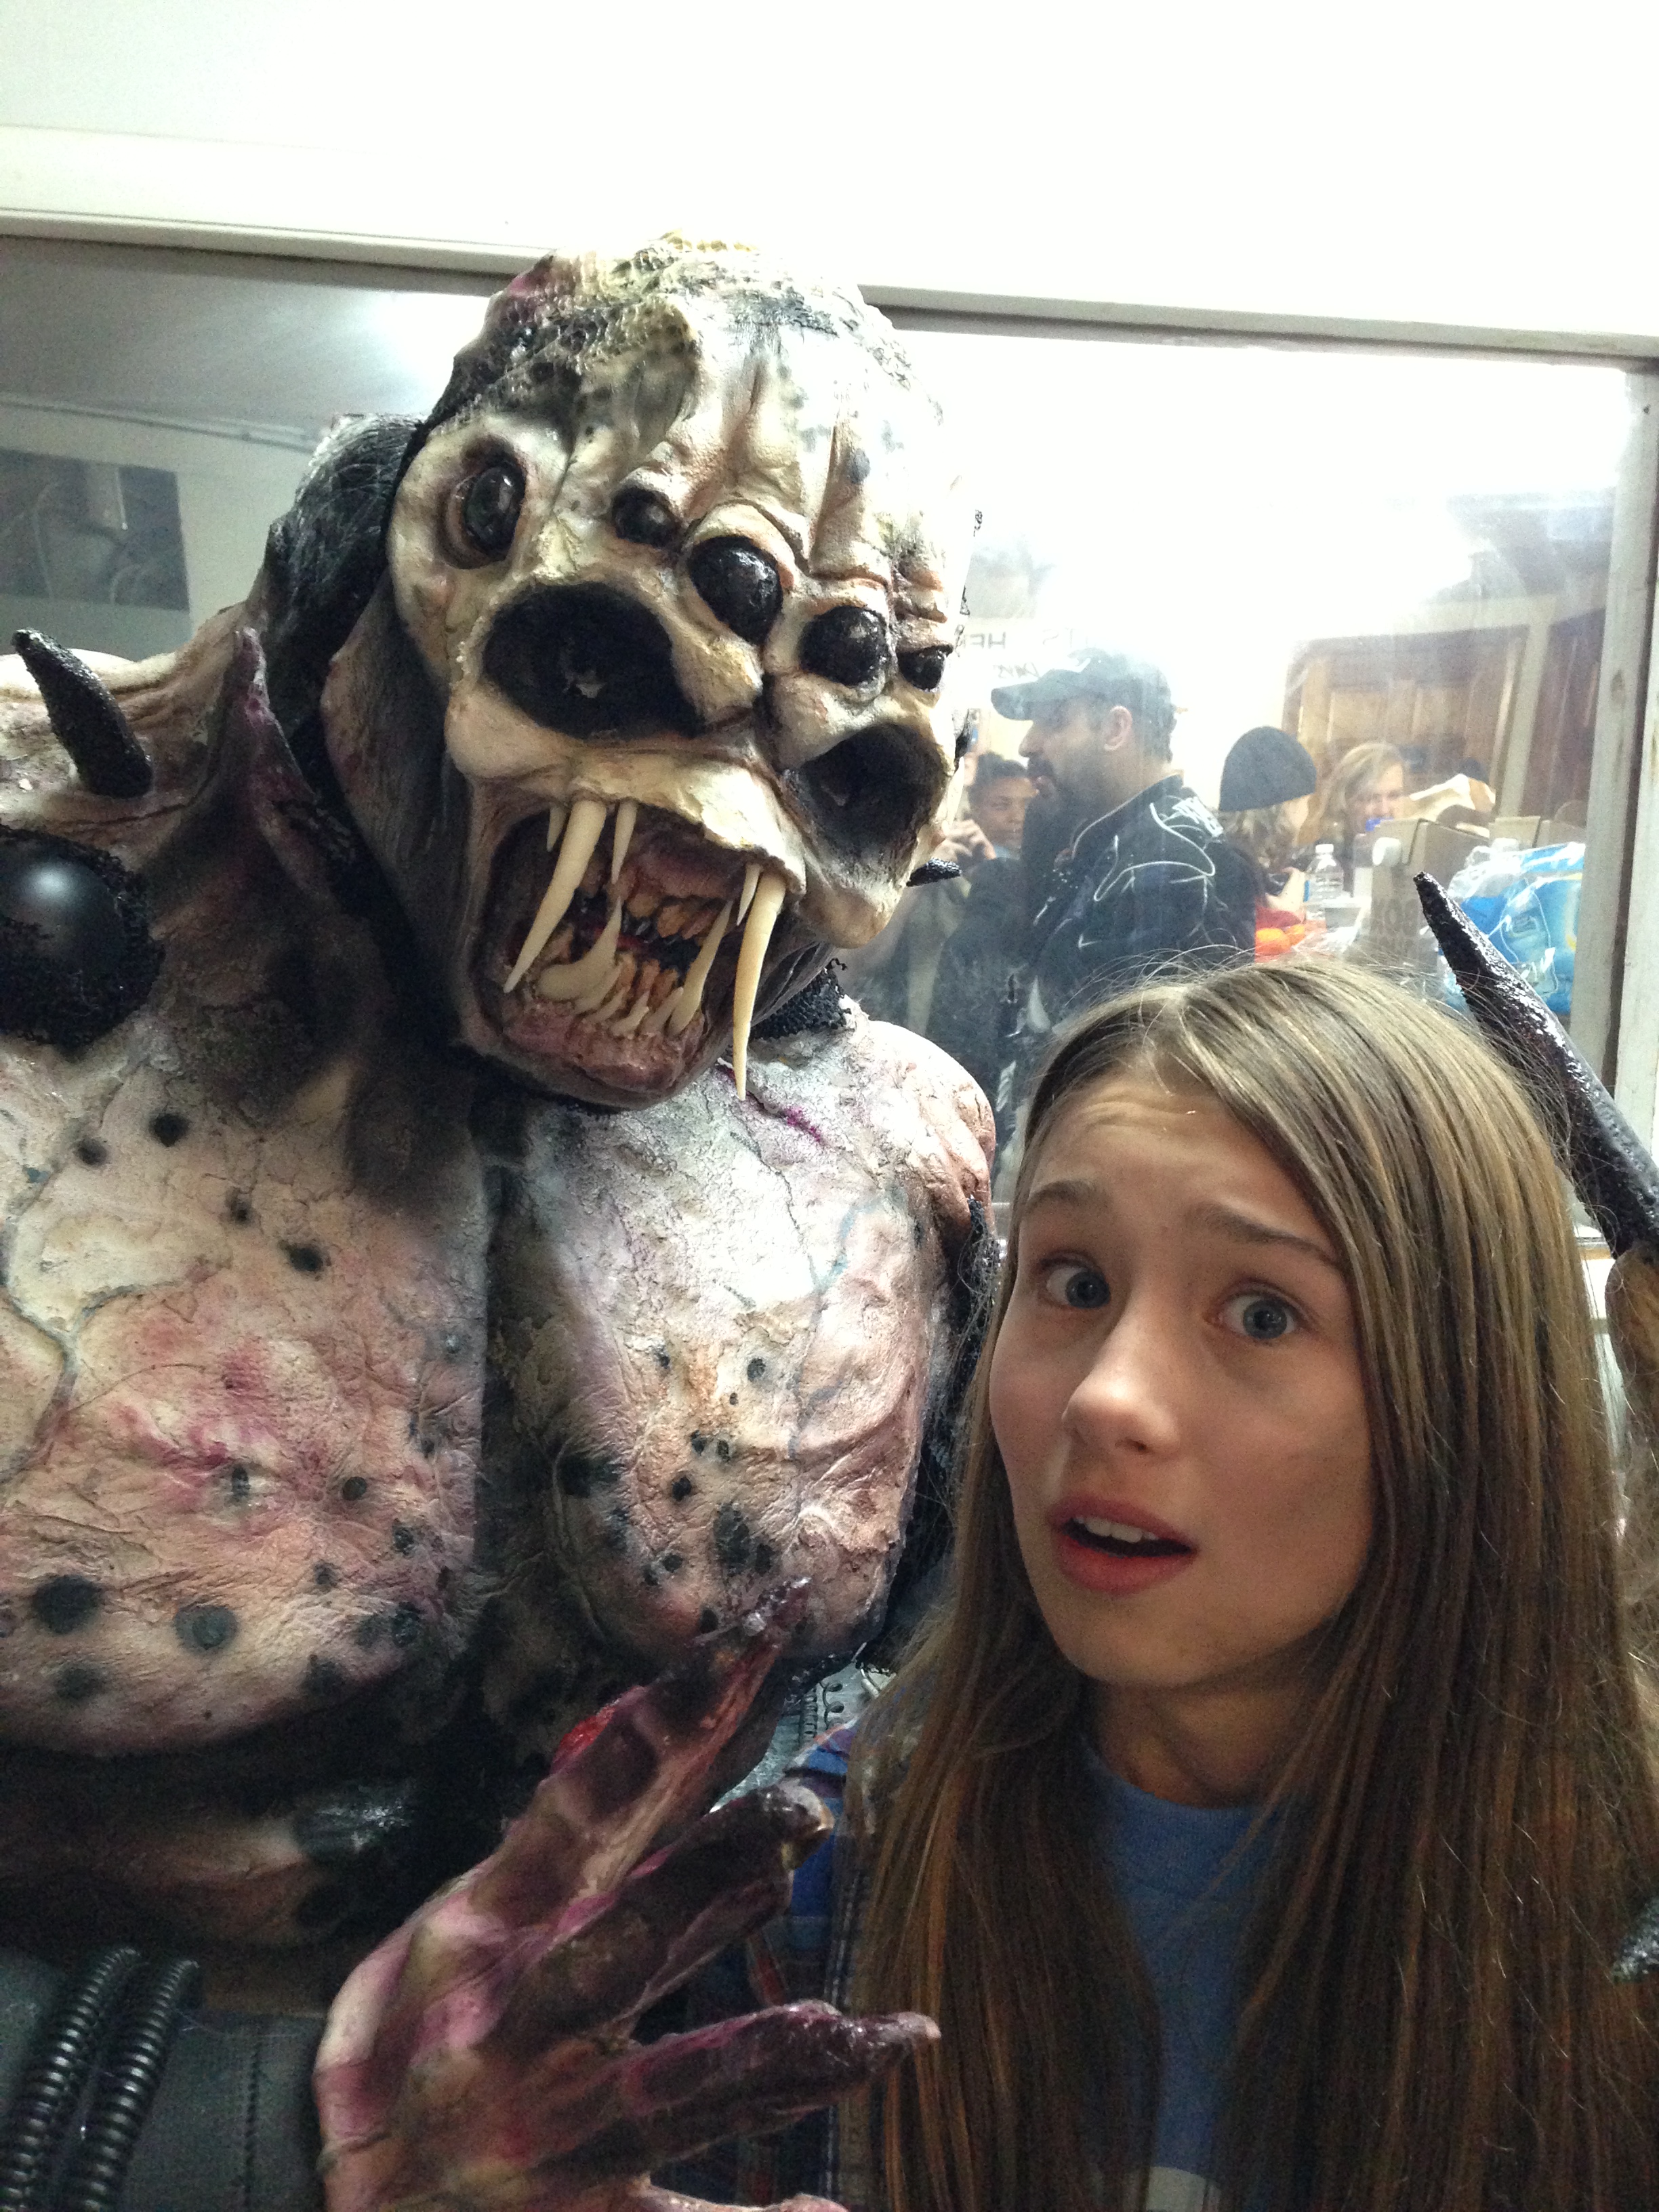 Kylie with the Keeper (monster) played by Shawn Sieger in Last Round.